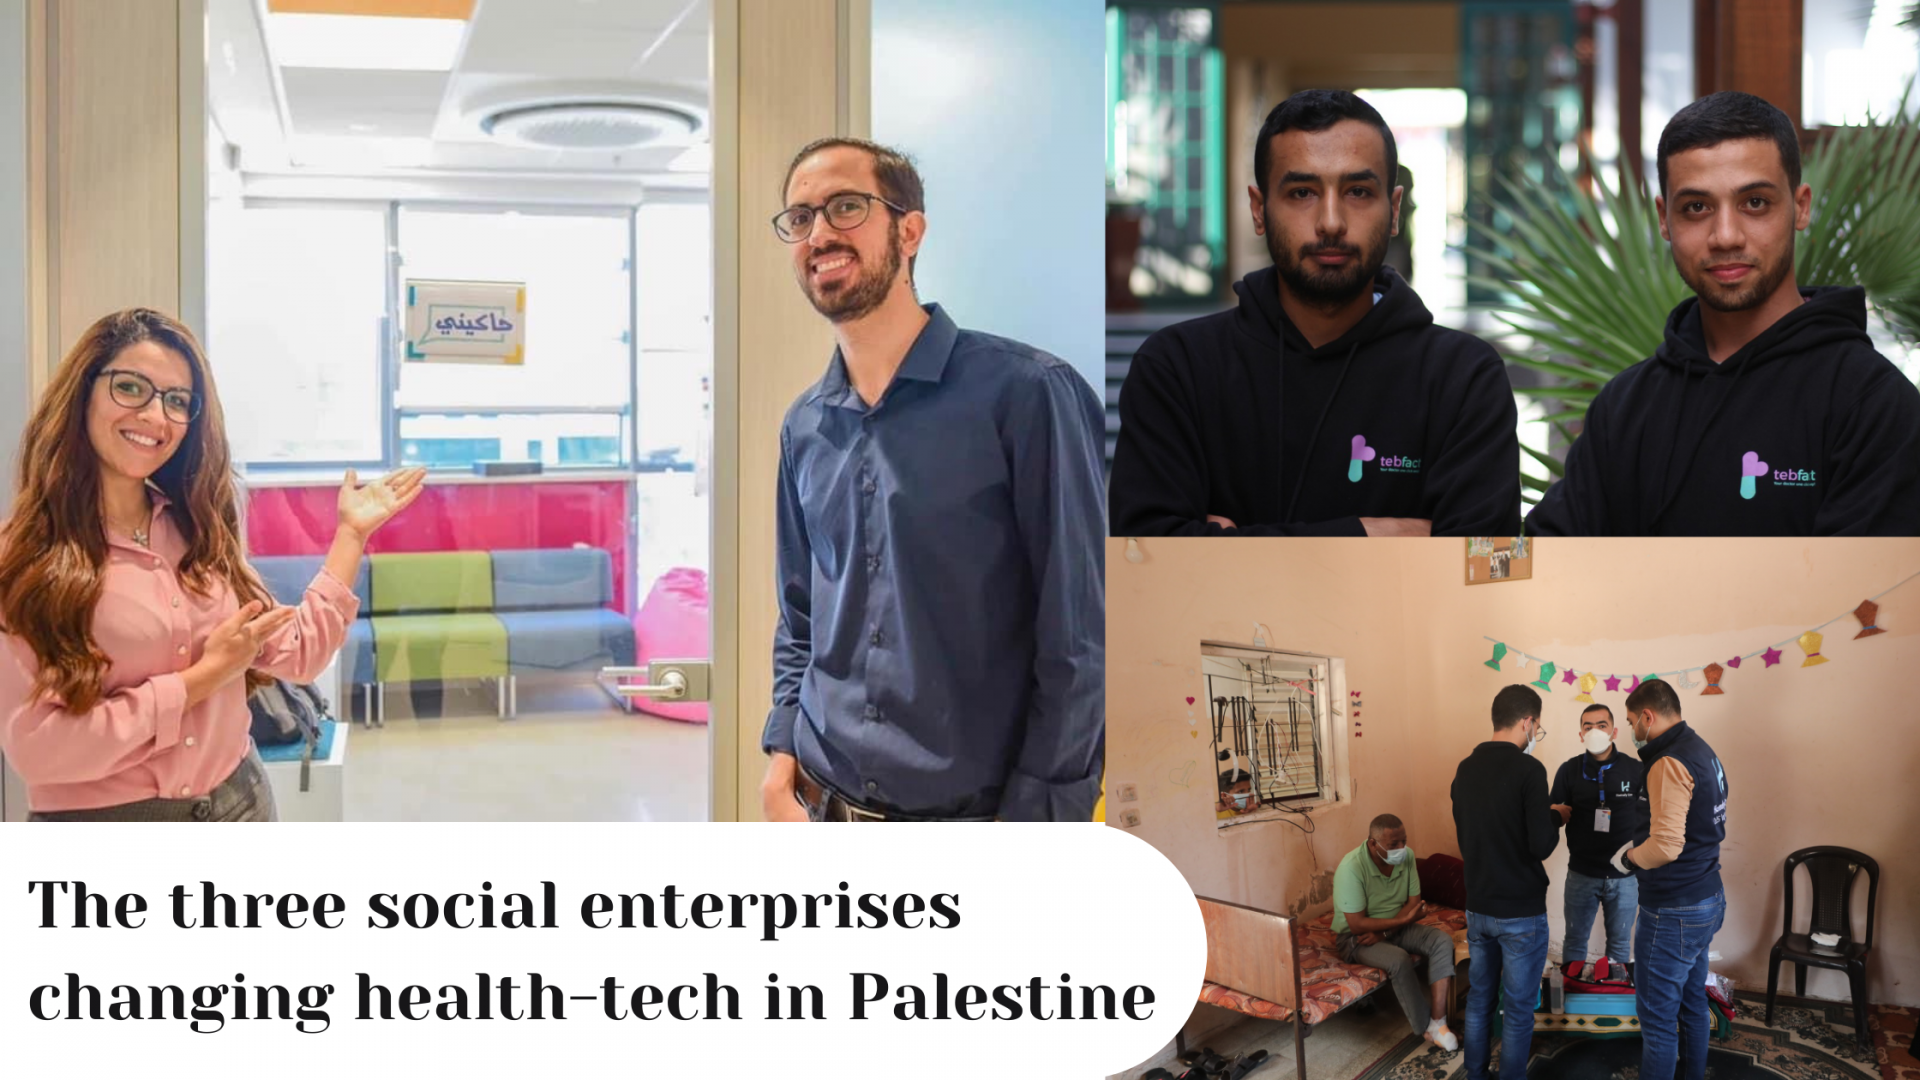 Here are three social enterprises changing health-tech in Palestine